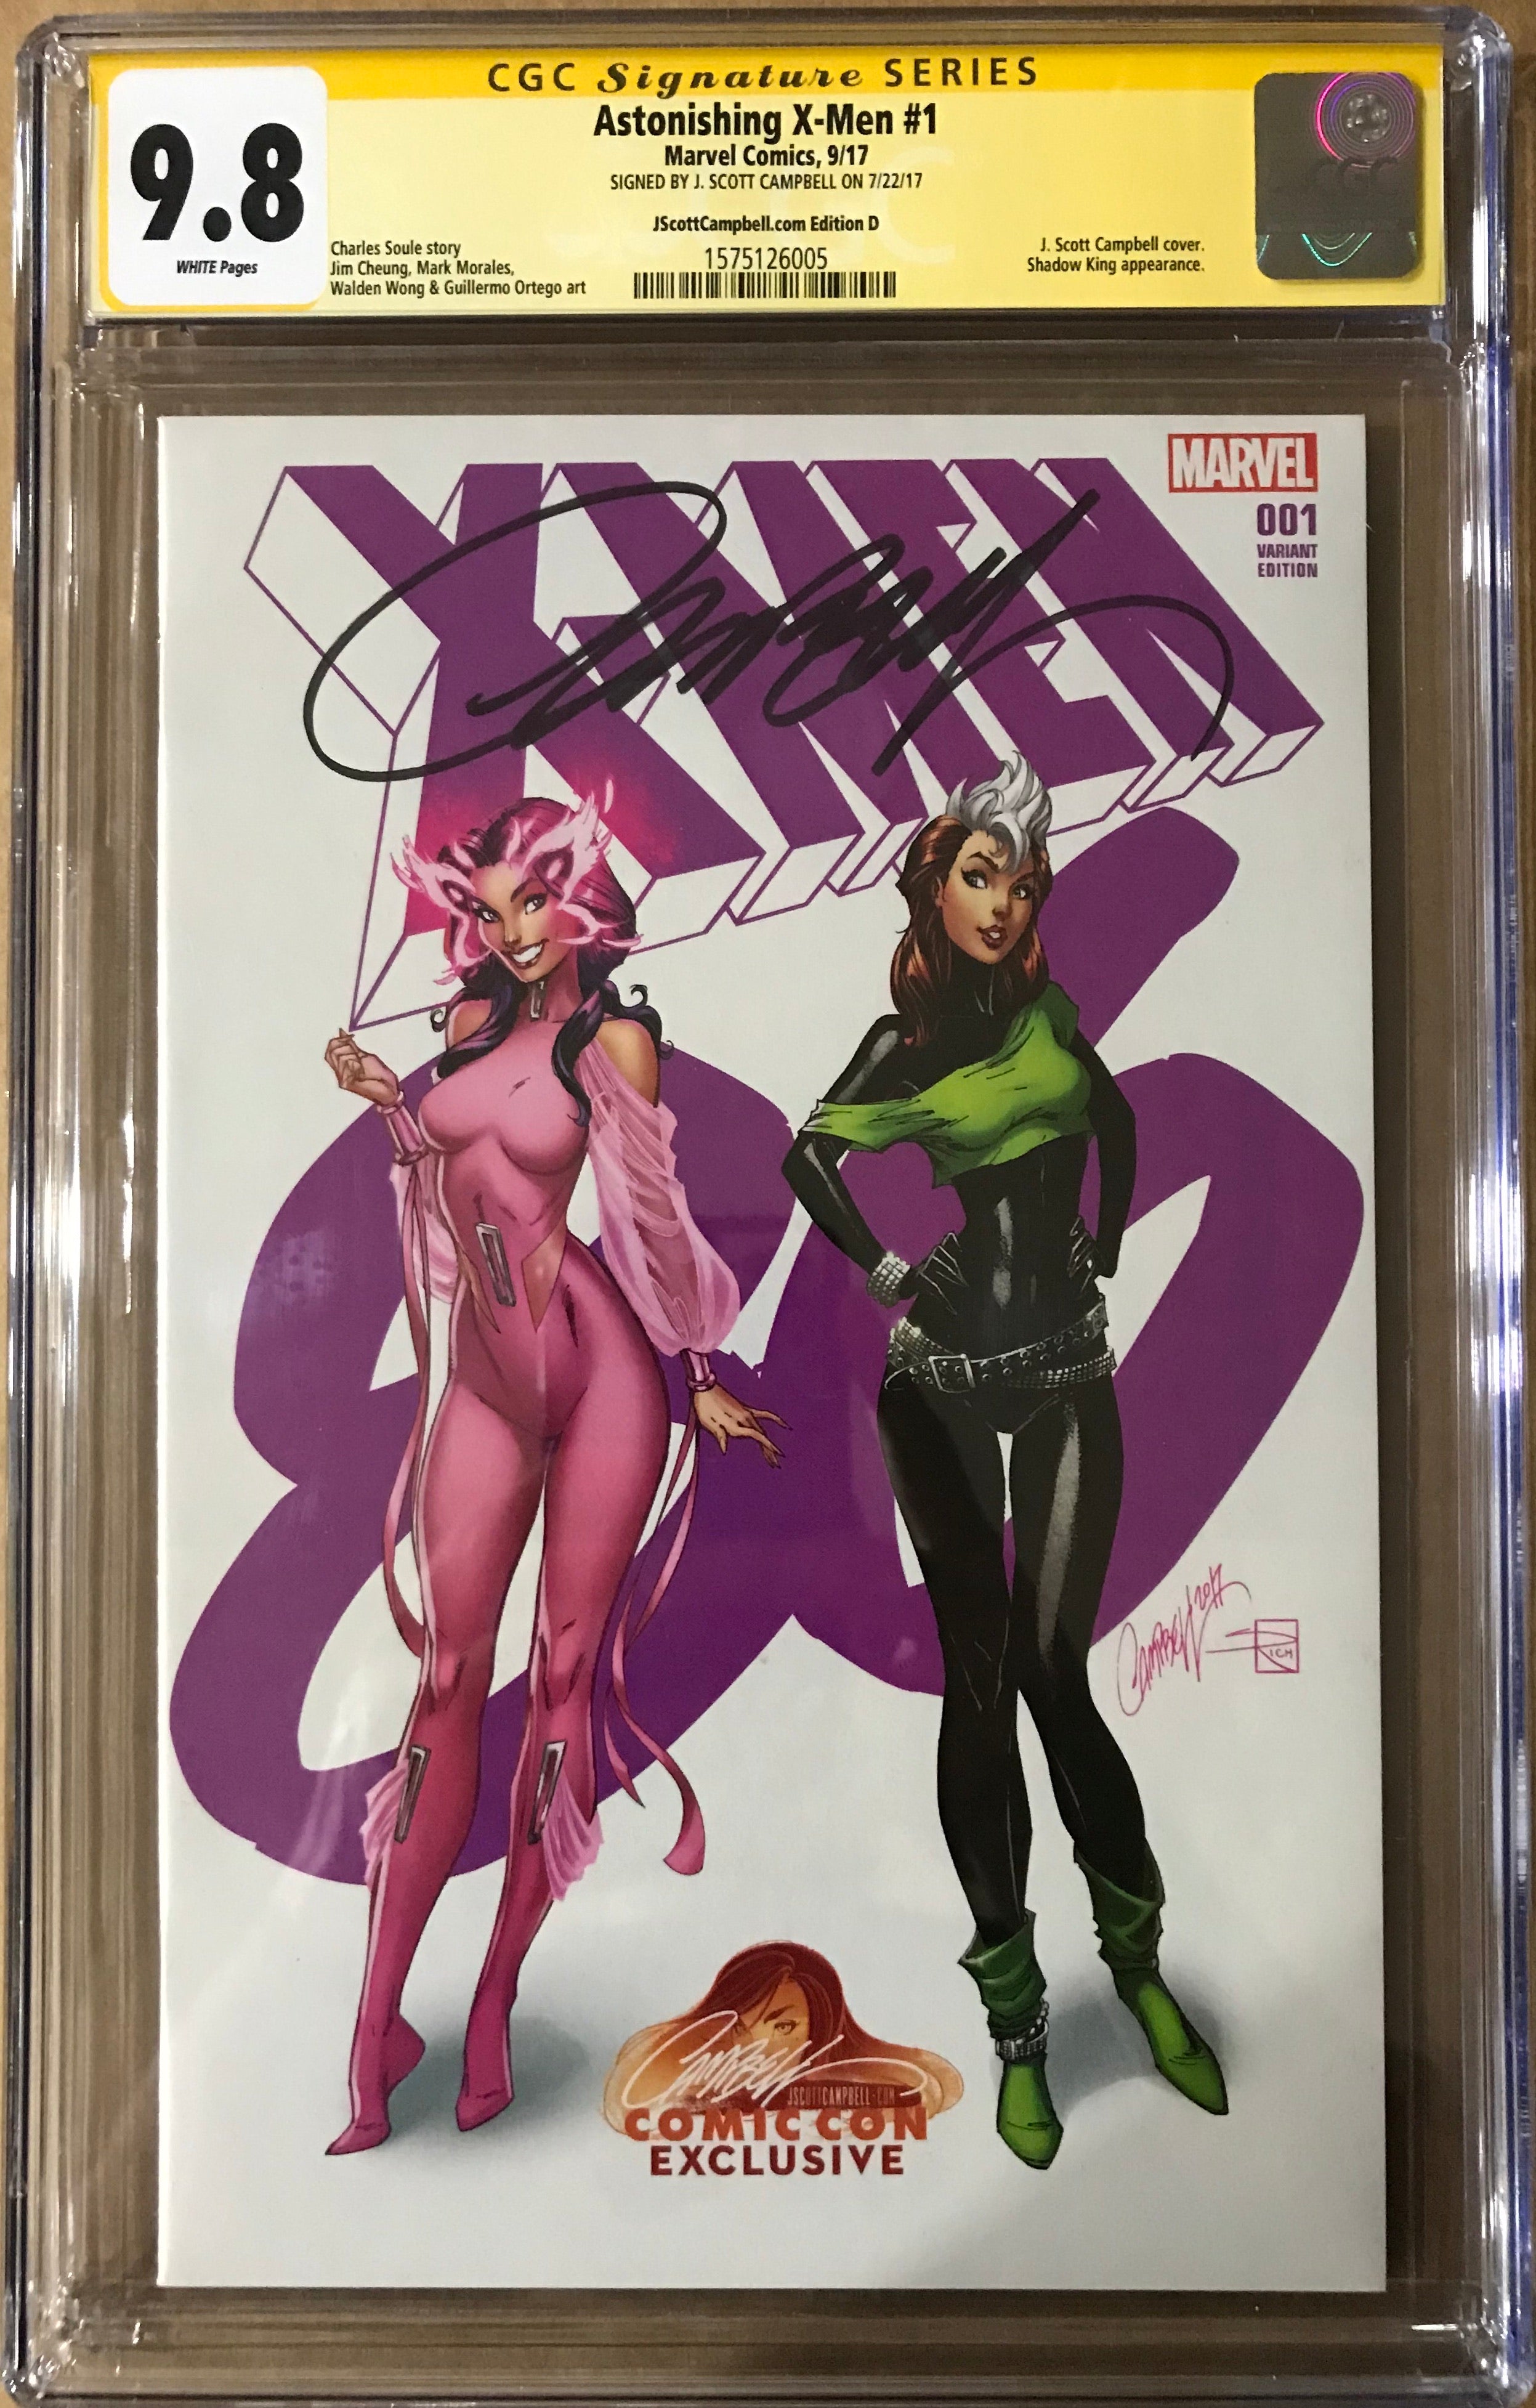 ASTONISHING X-MEN #1 CONVENTION EXCLUSIVE CGC 9.8 SIGNED BY J SCOTT CAMPBELL